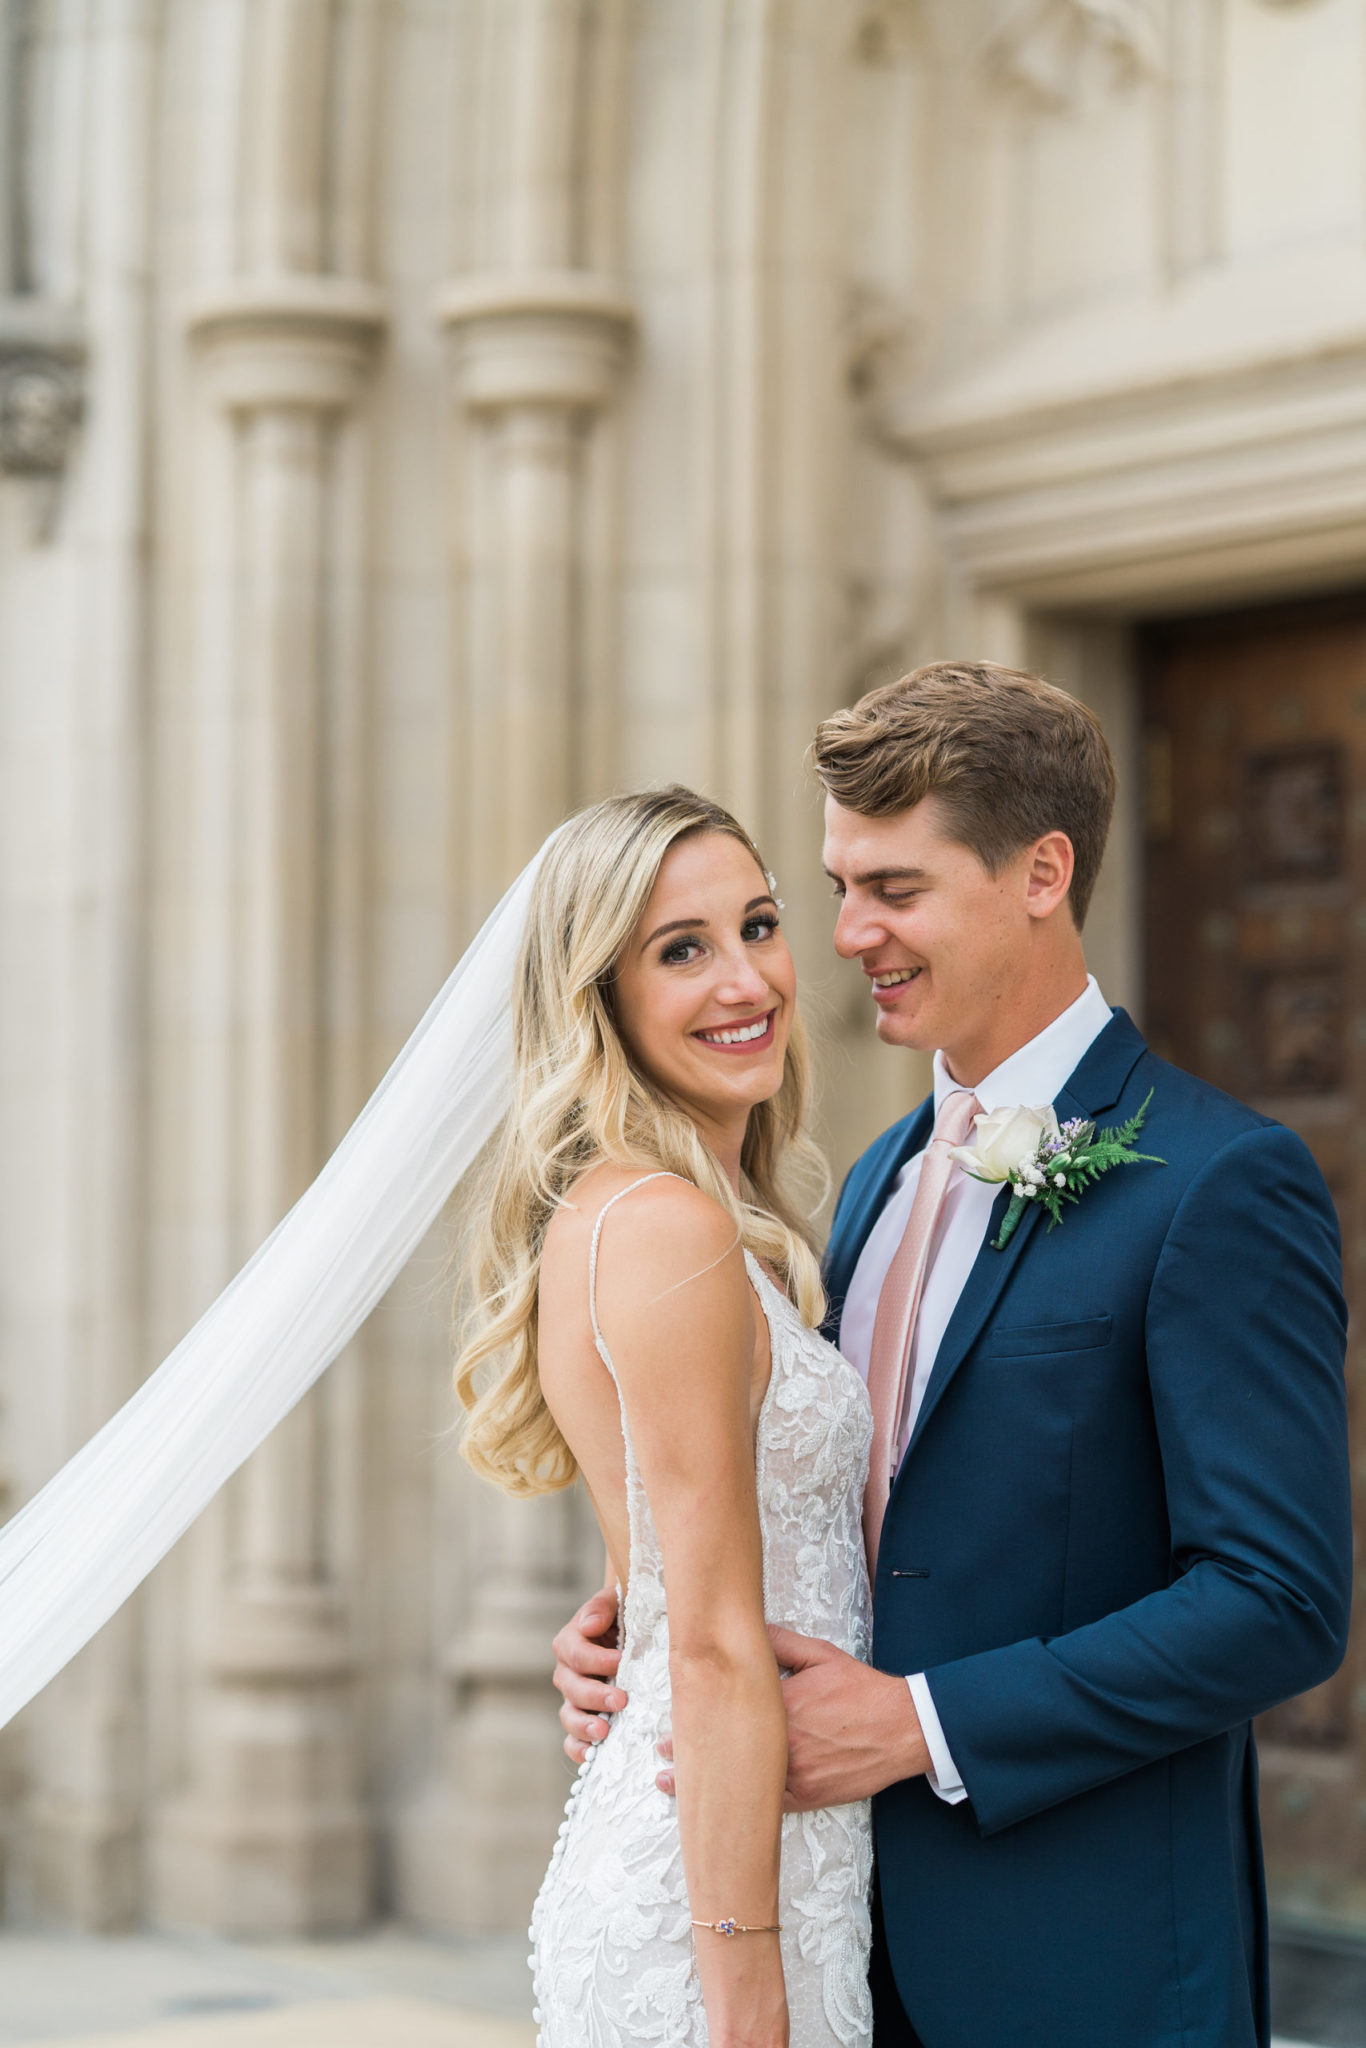 a classic bride and groom wedding portrait in front of the church